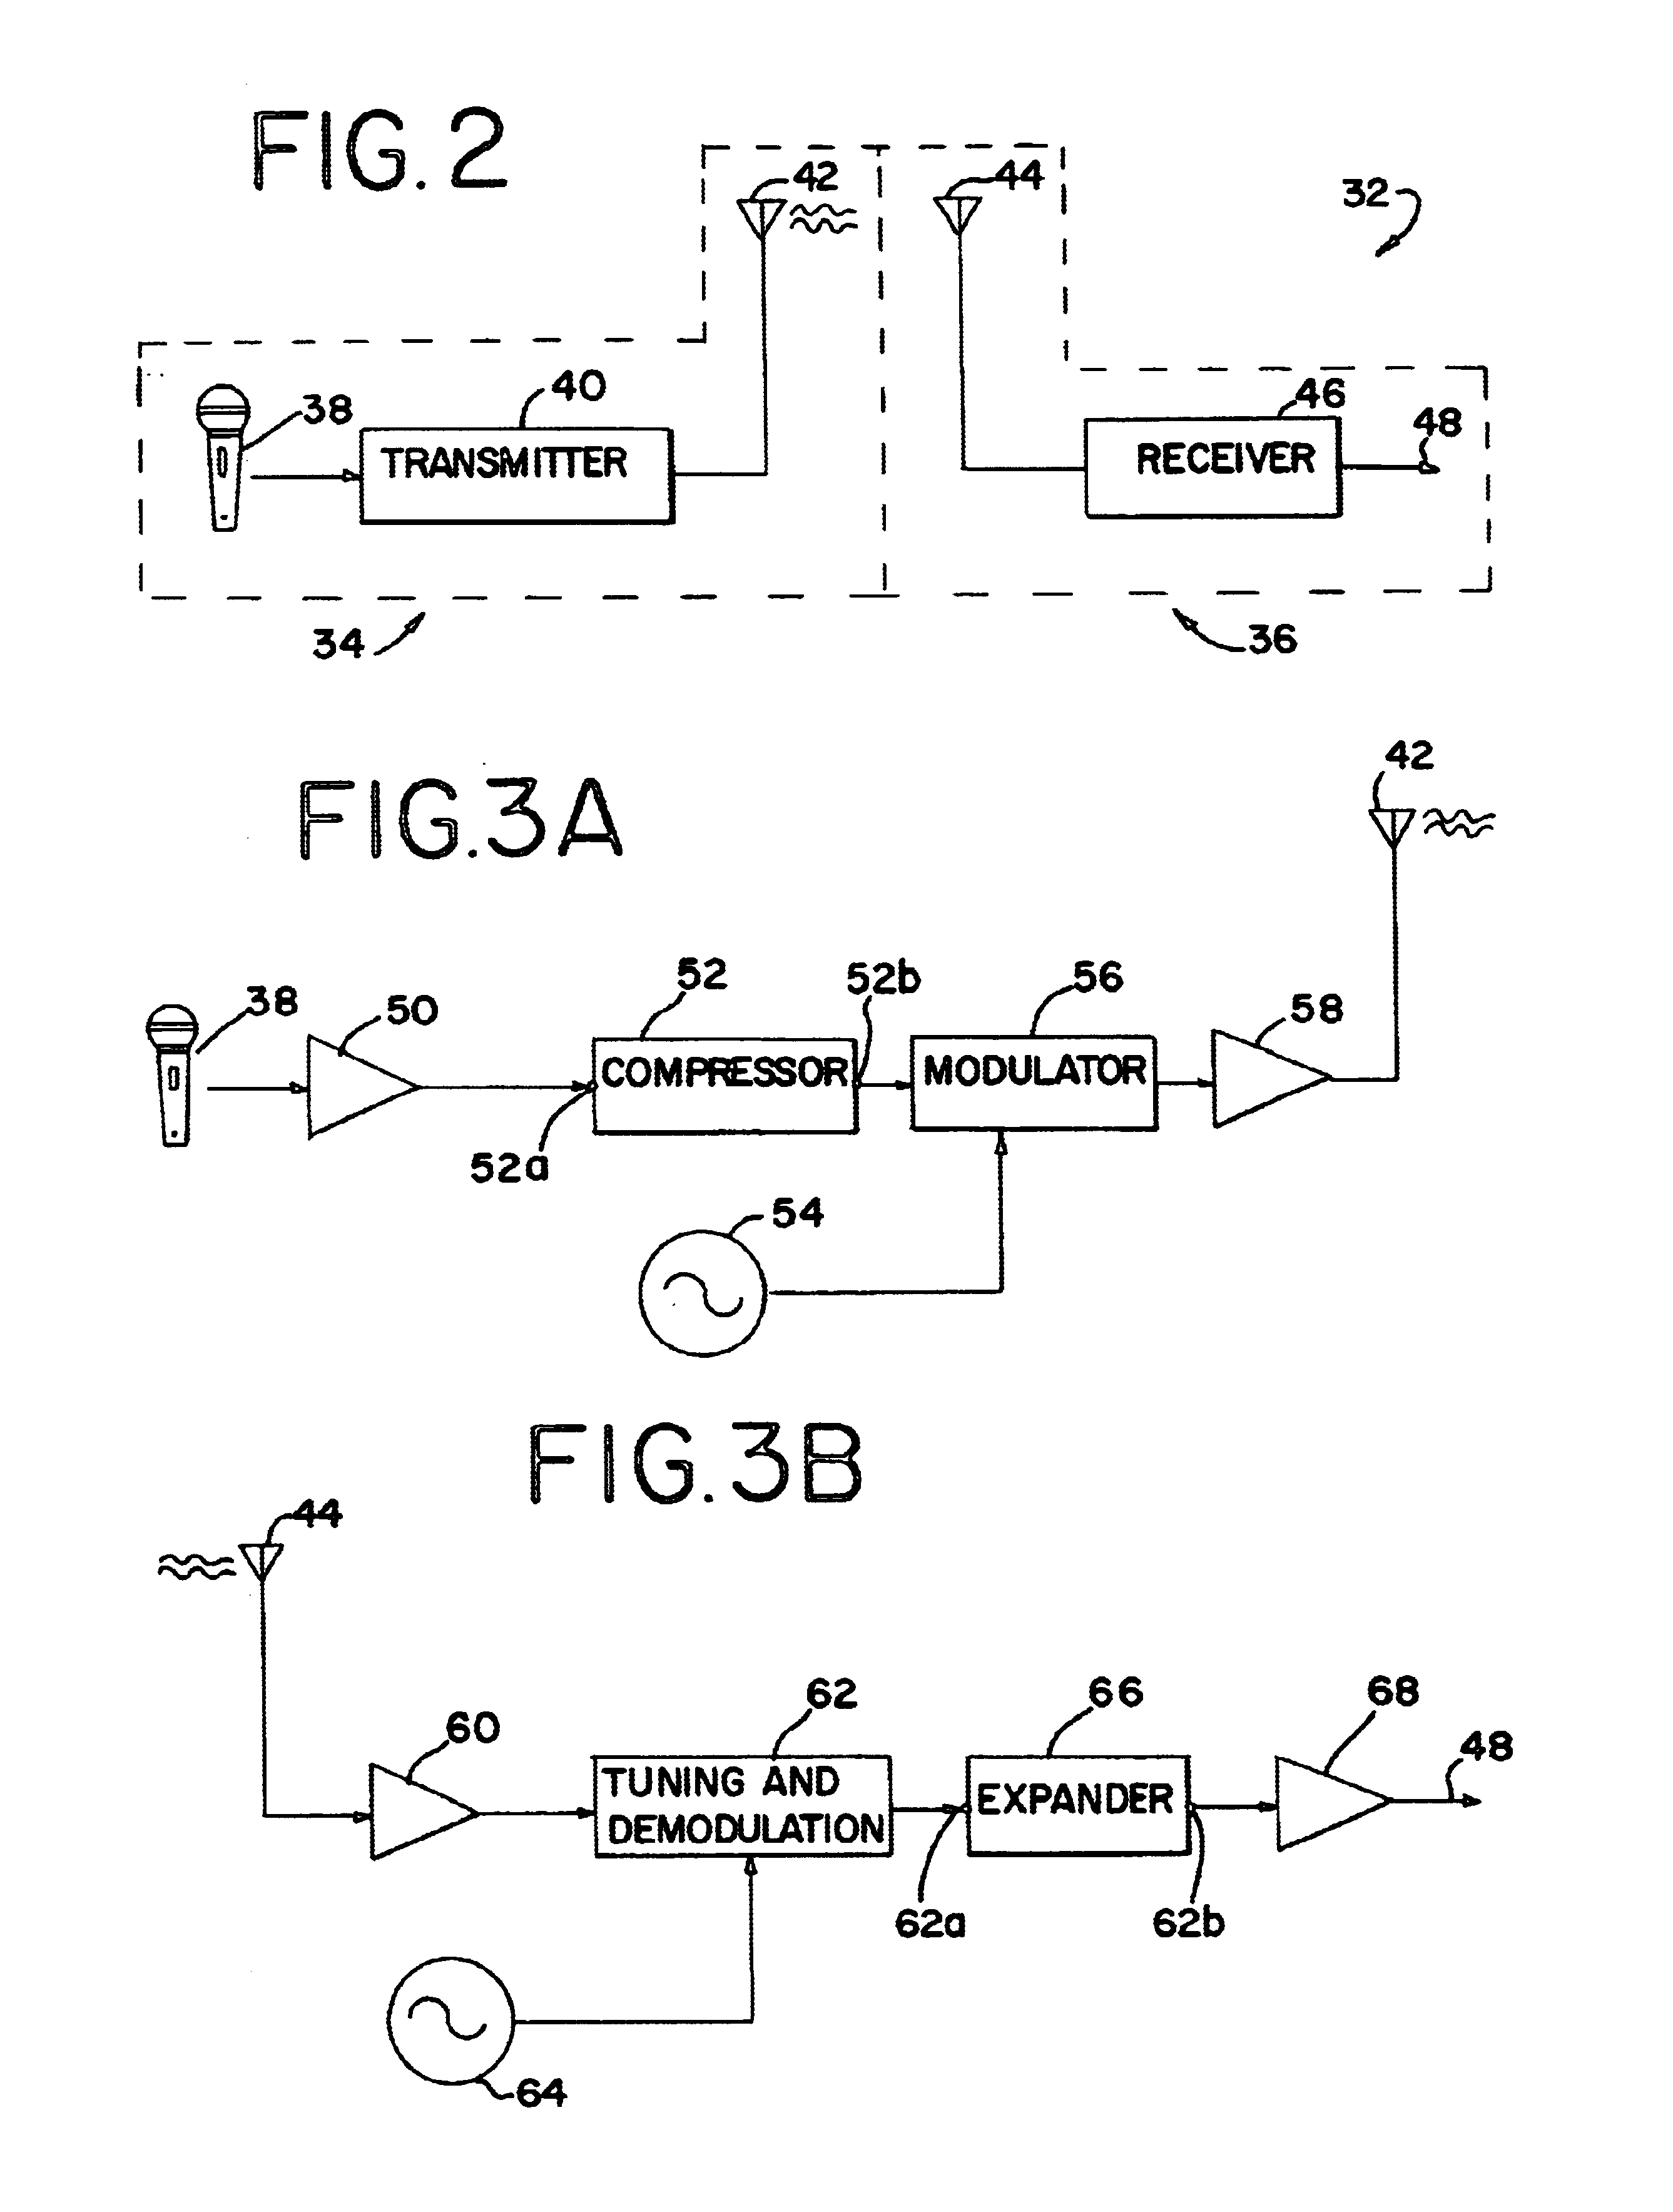 Wireless microphone having a split-band audio frequency companding system that provides improved noise reduction and sound quality